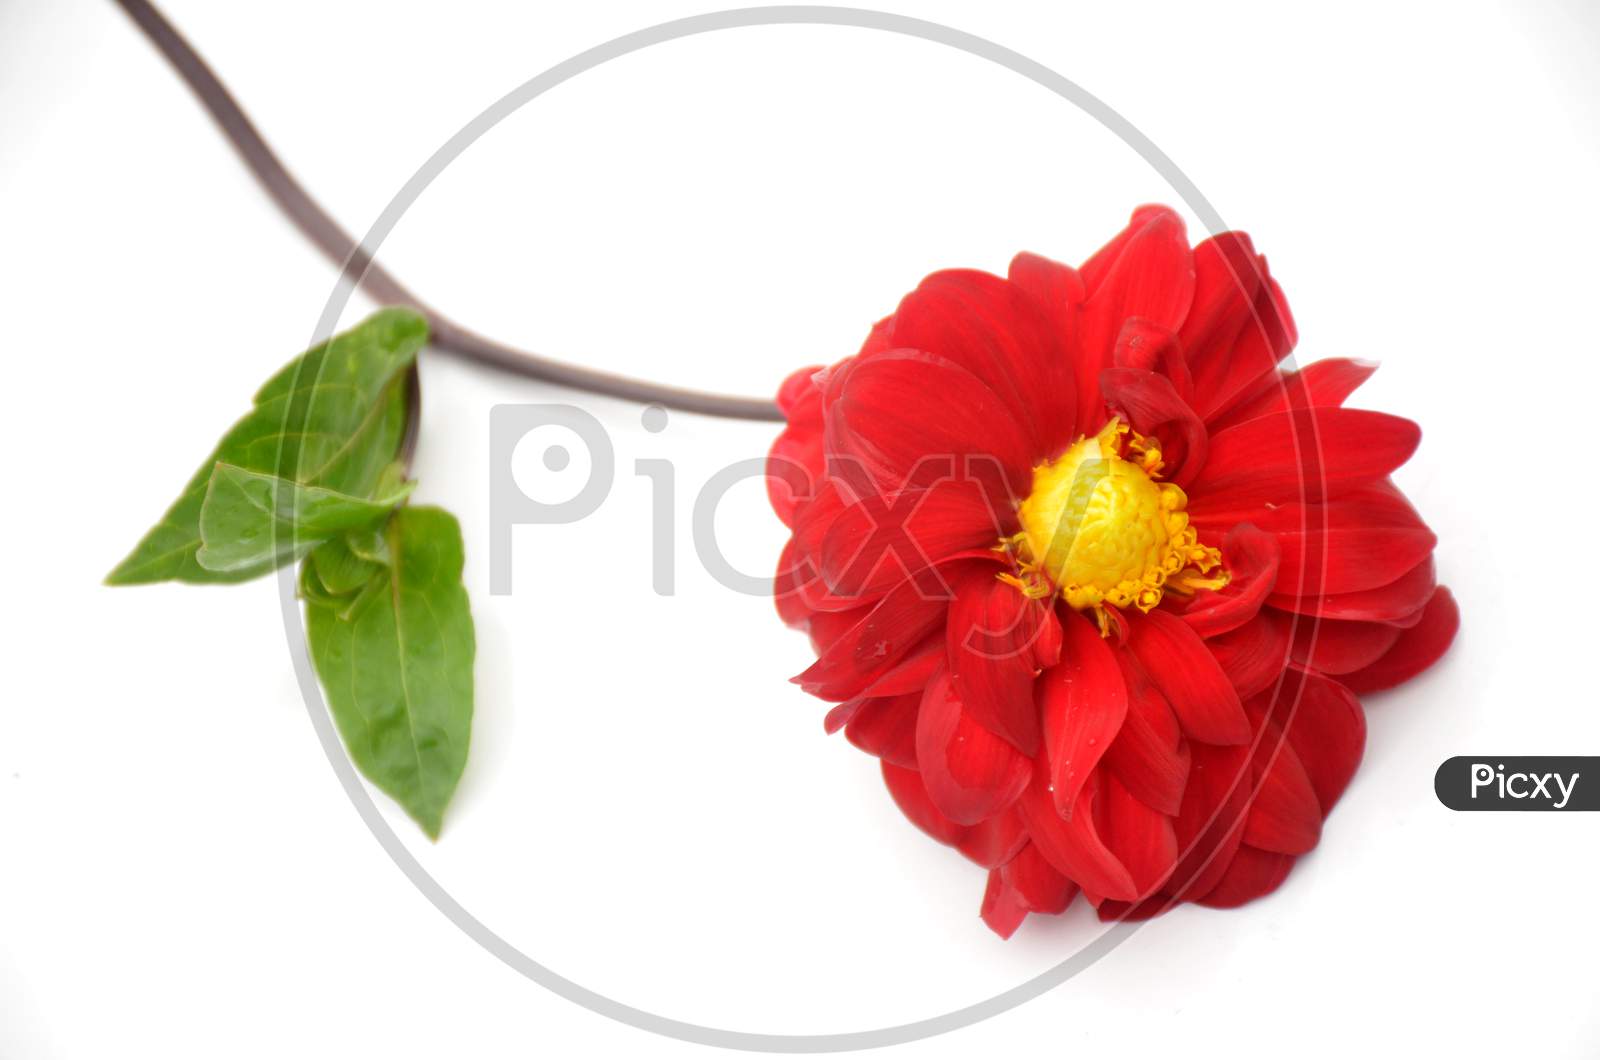 The Beautiful Red Dahlia Flower With Leaf And Branch Isolated On White Background.